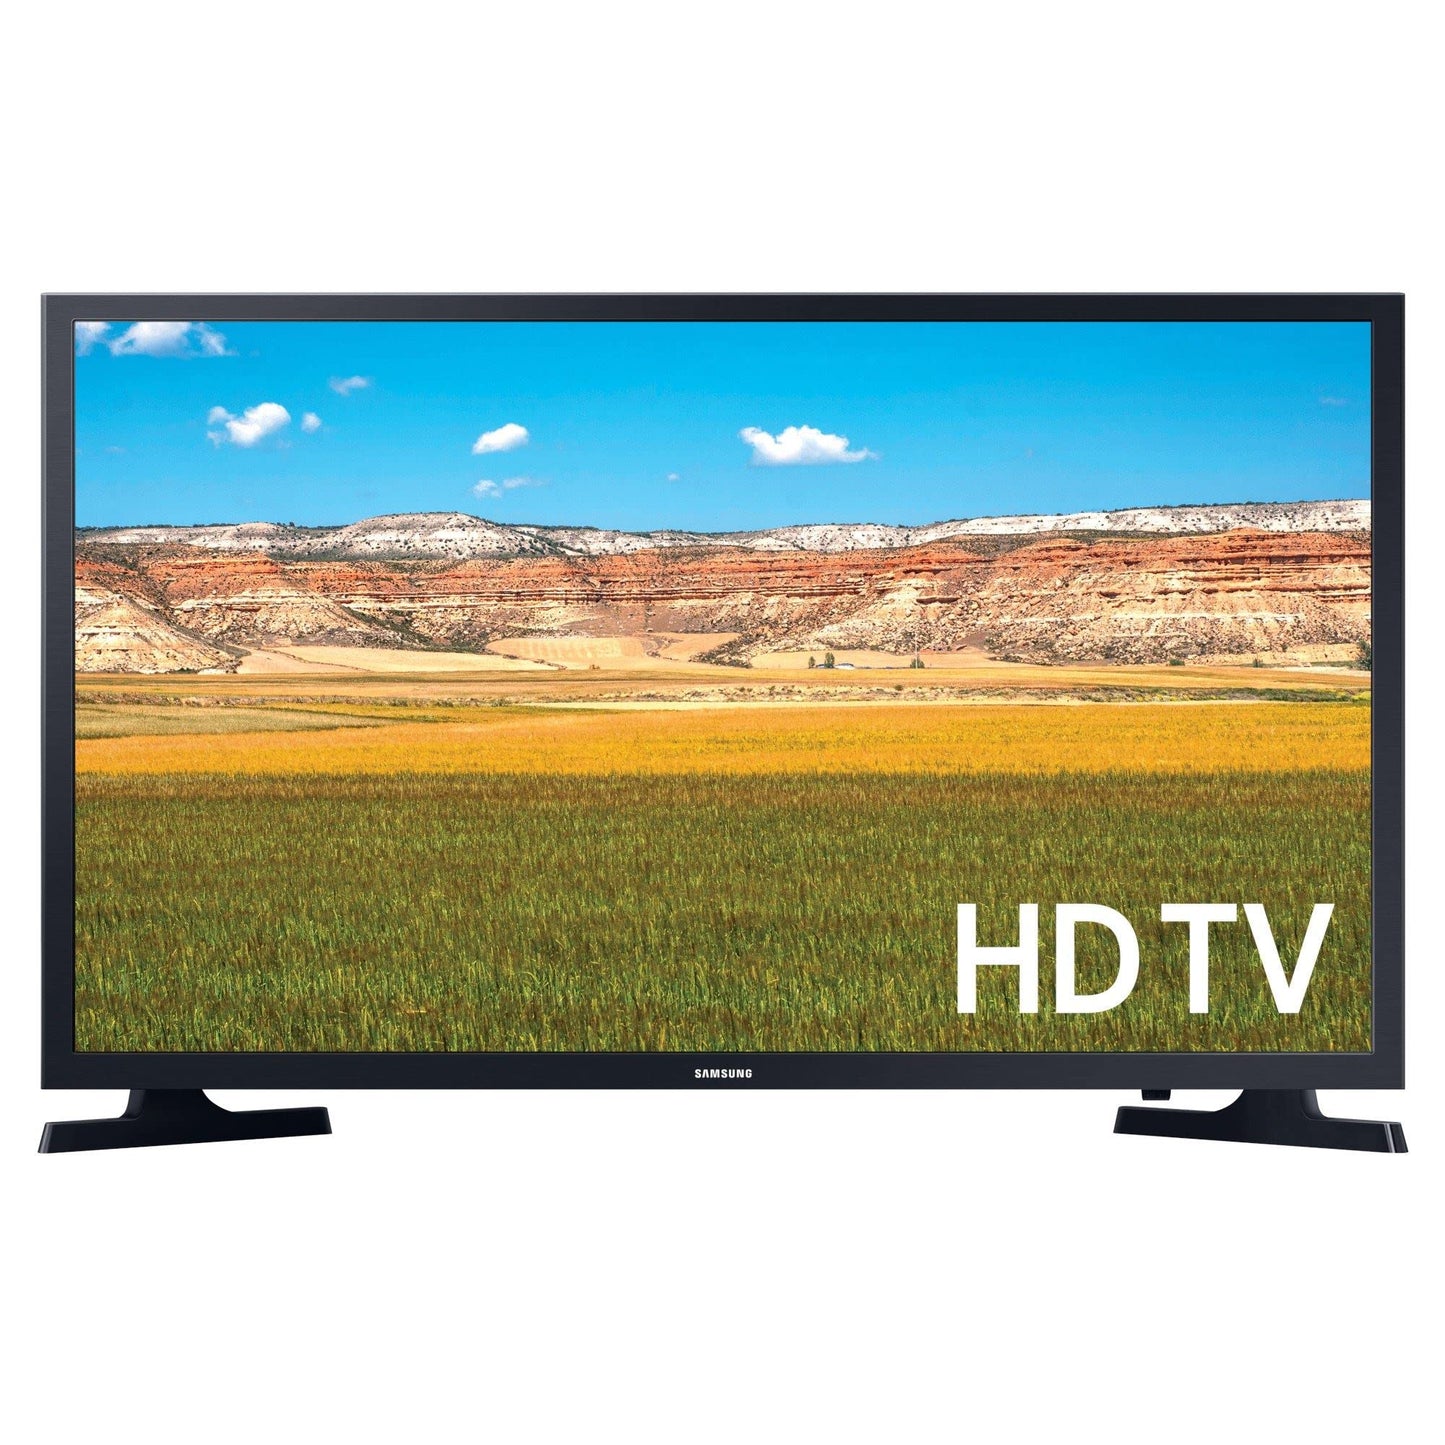 Samsung 32 Inch, 720p, T4300 LED HDR Smart TV With Contrast Enhancer, Ultra Clean View & Purcolour Image Technology Built-In, HDMI, USB, Easy To Set Up, App Connectivity